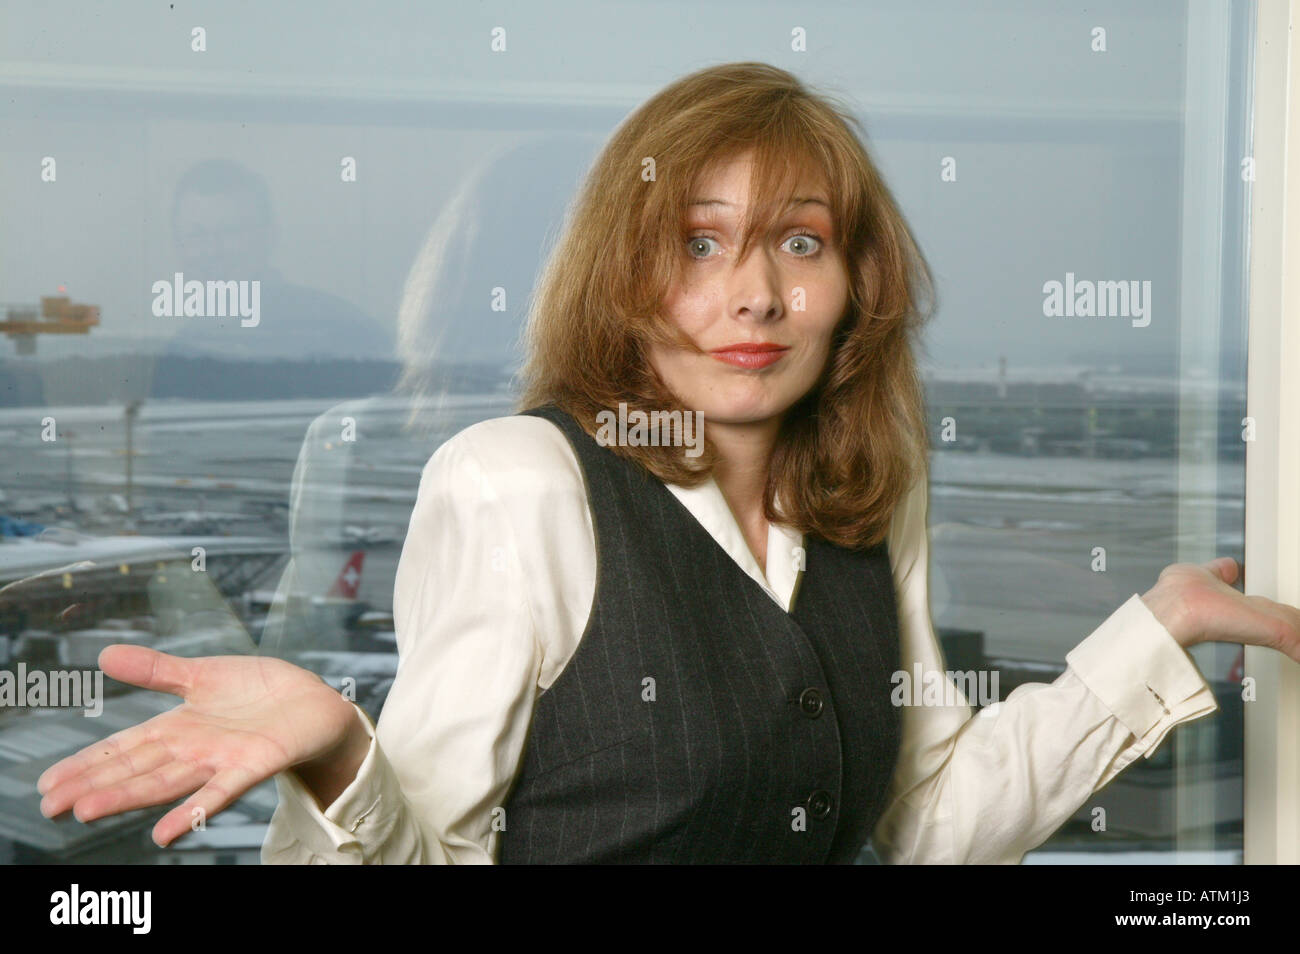 business woman waiting at the airport Stock Photo